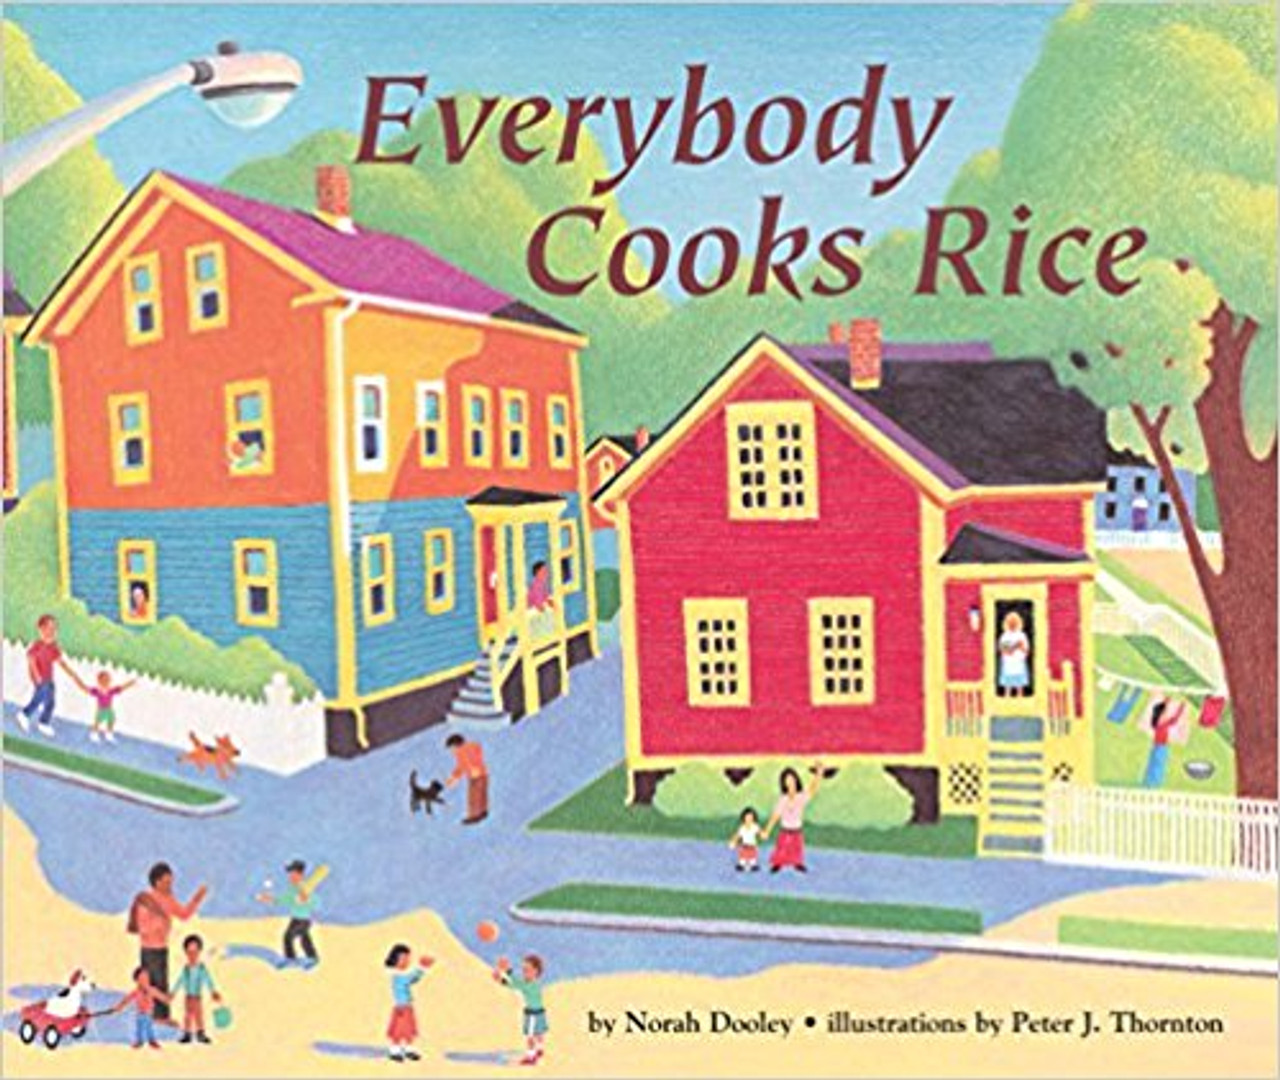 Everybody Cooks Rice by Norah Dooley